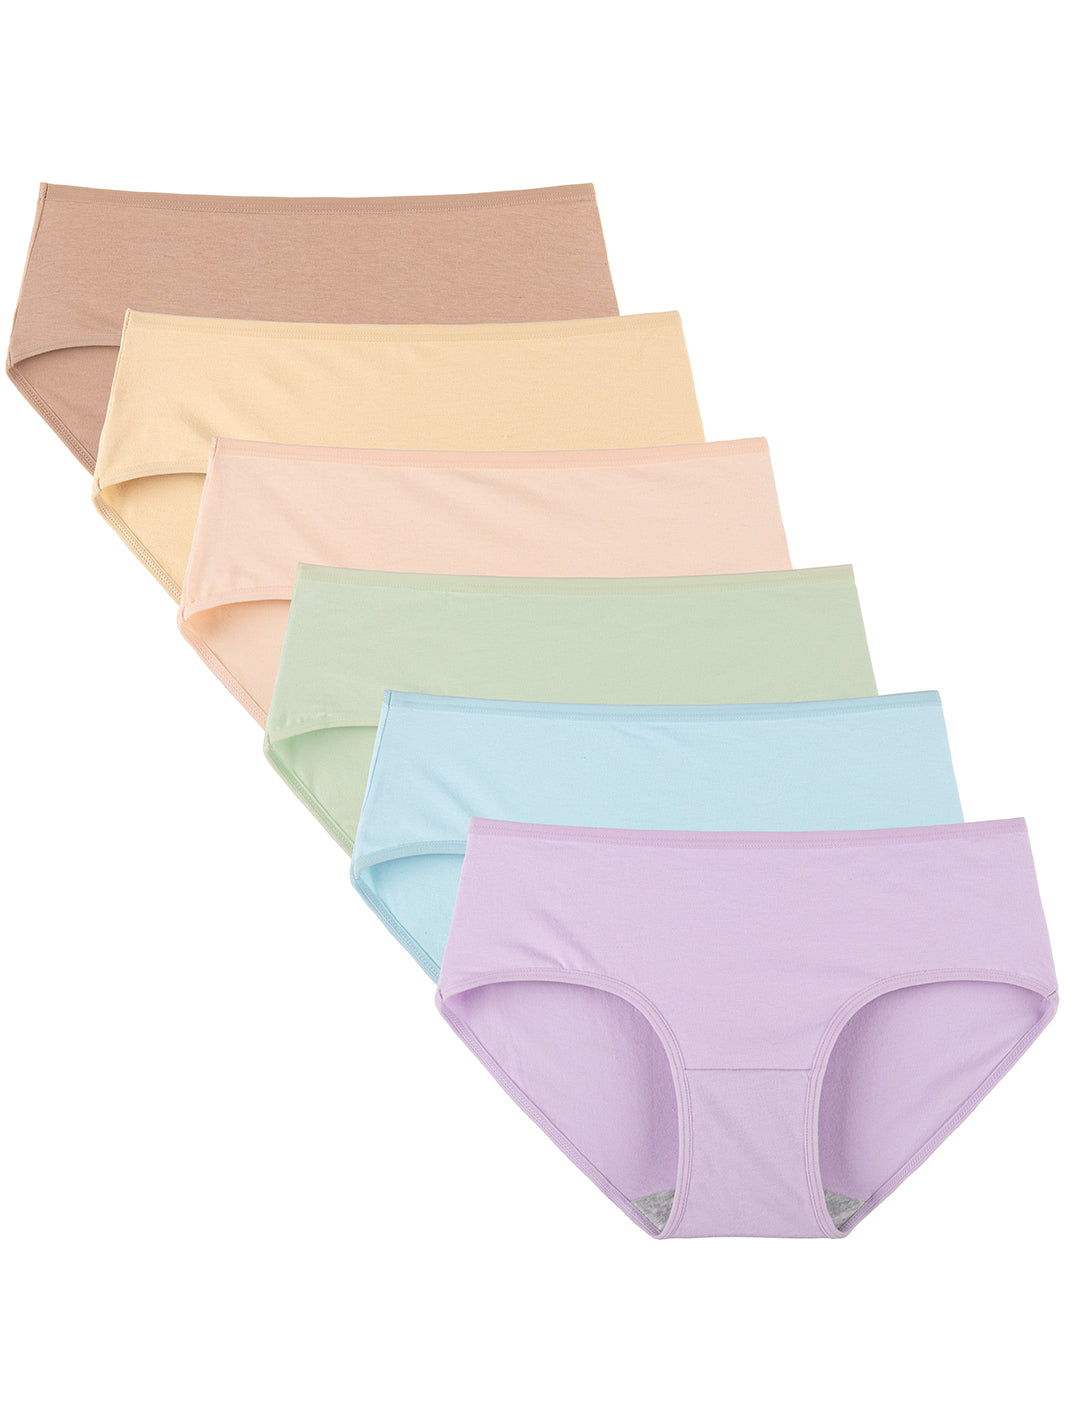 INNERSY Womens Underwear Cotton Hipster Panties Low Rise Underwear For Women  6-Pack (XX-Large, Multi-Color Light) 